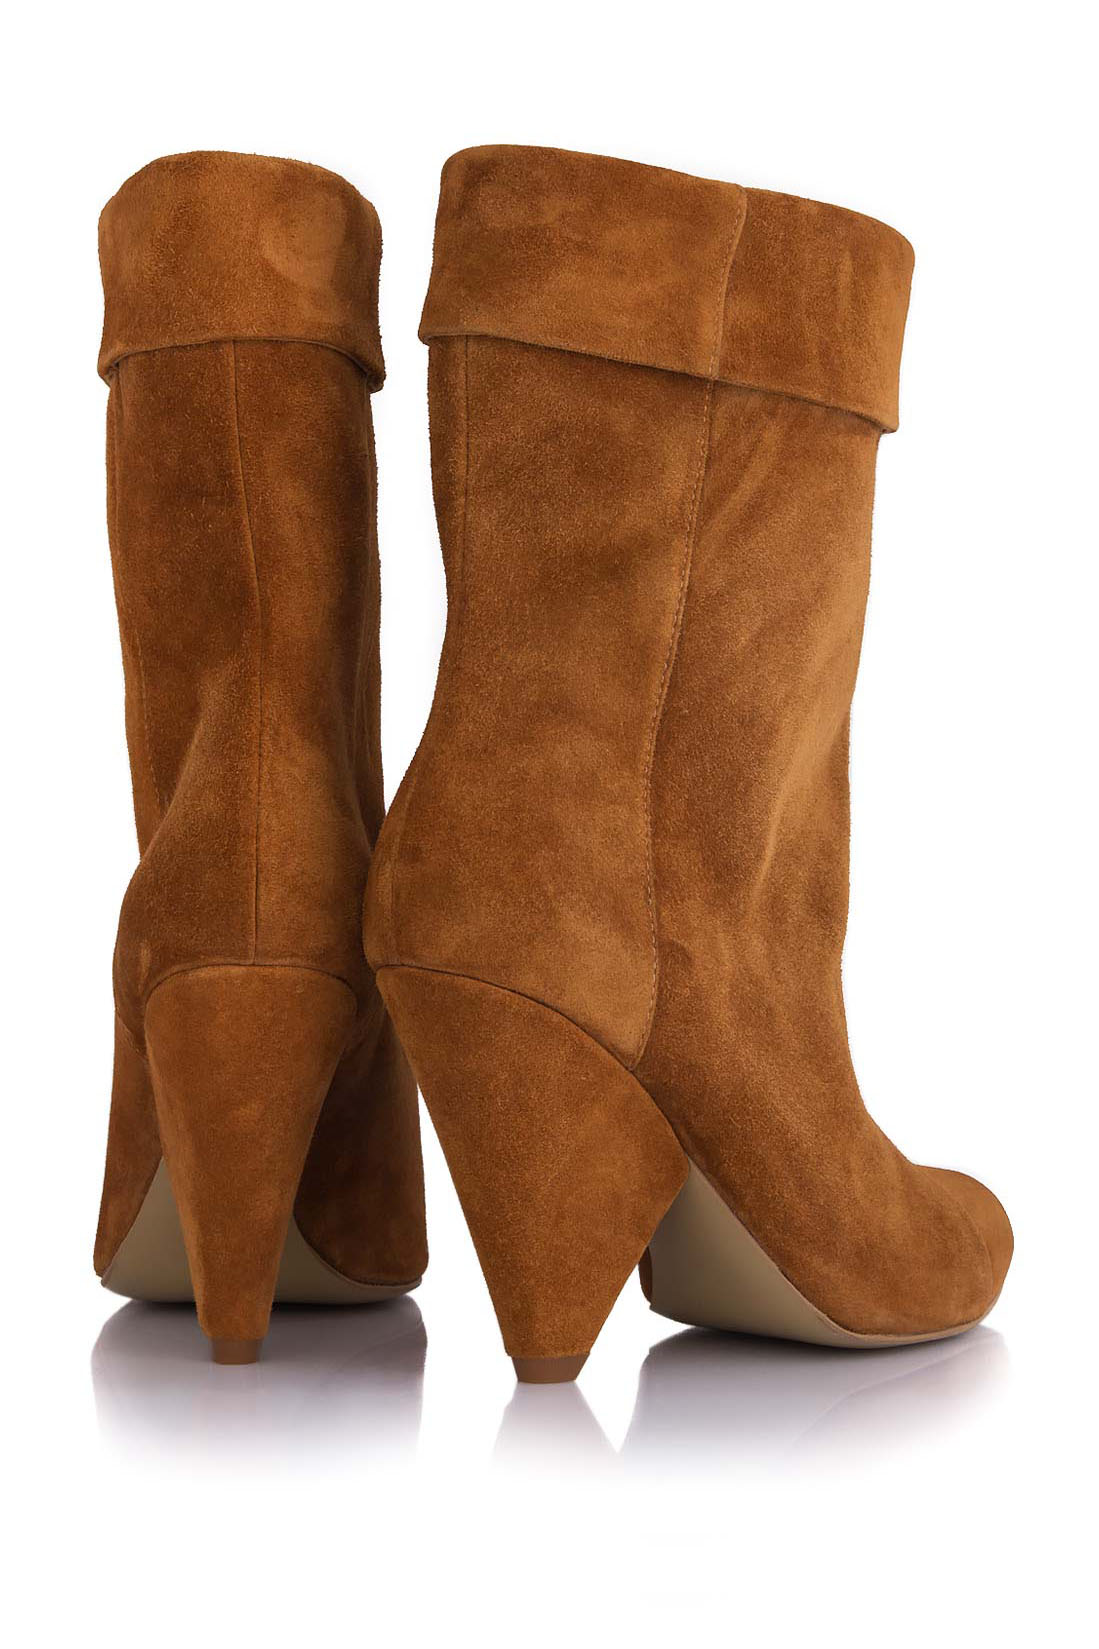 Suede ankle boots Ana Kaloni image 3